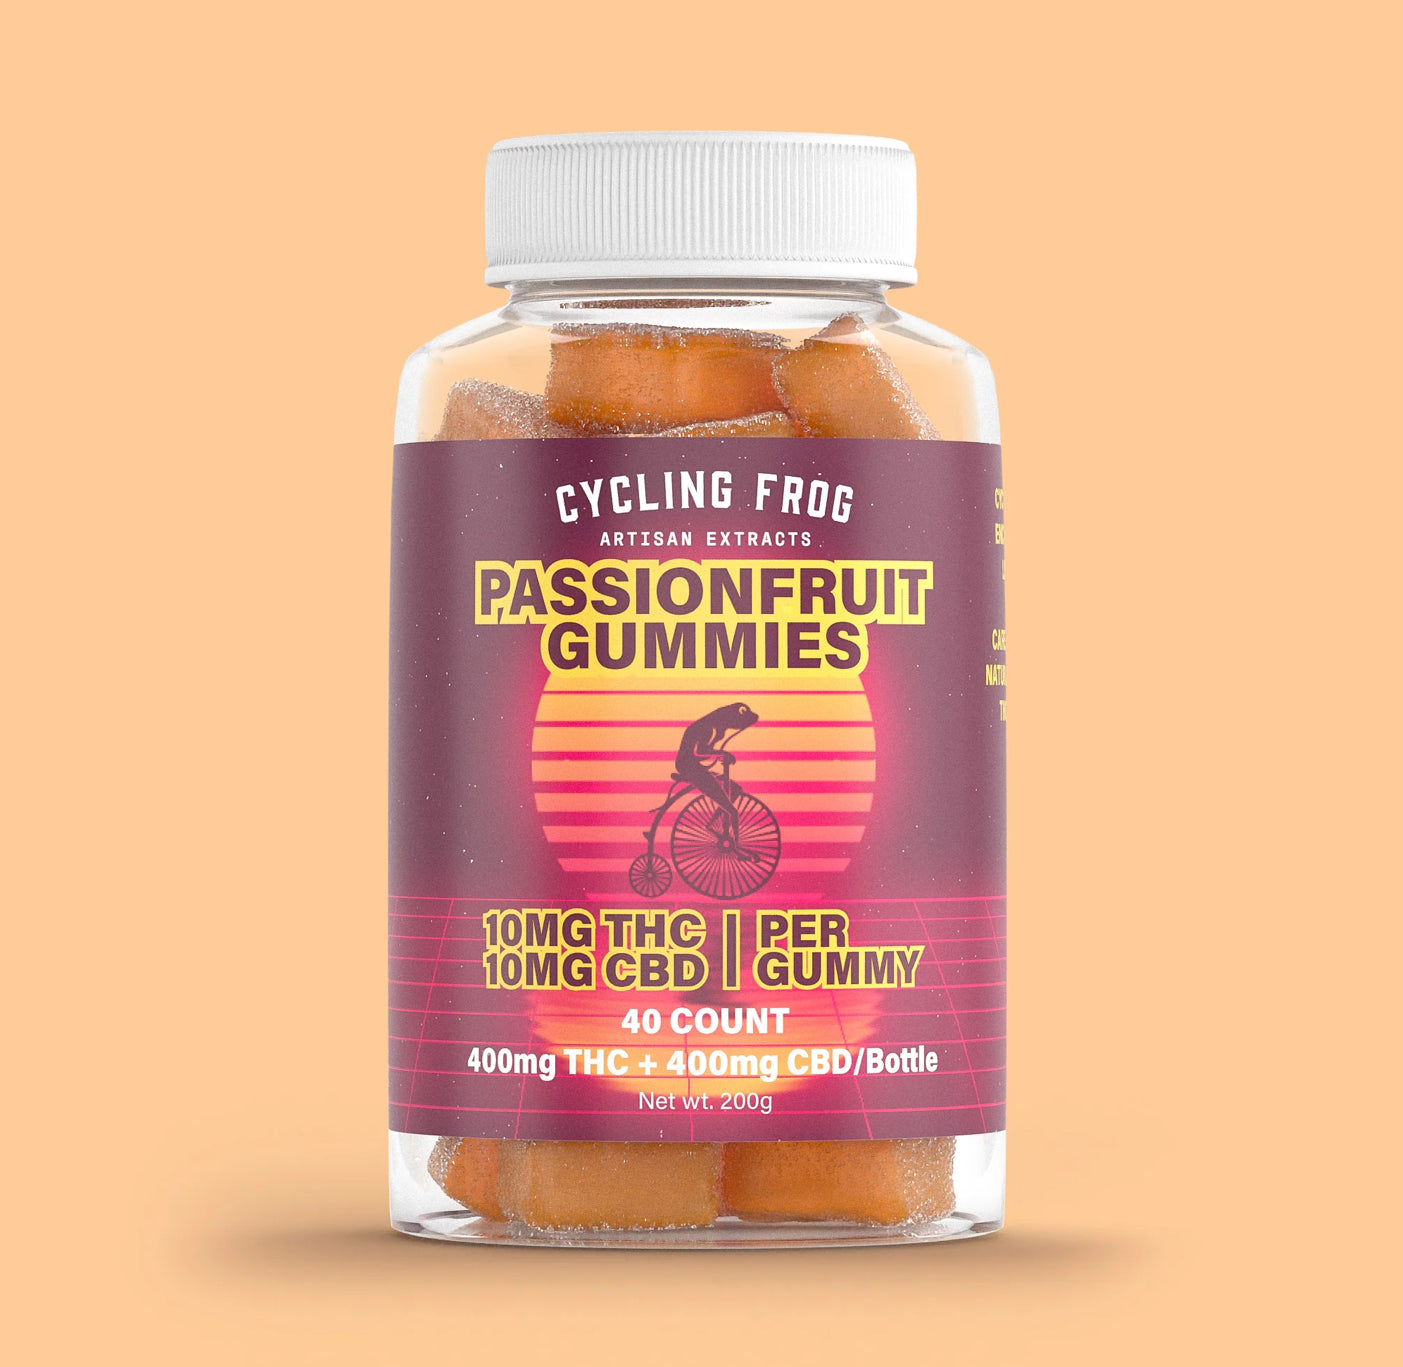 Cycling Frog Gummies PassionFruit